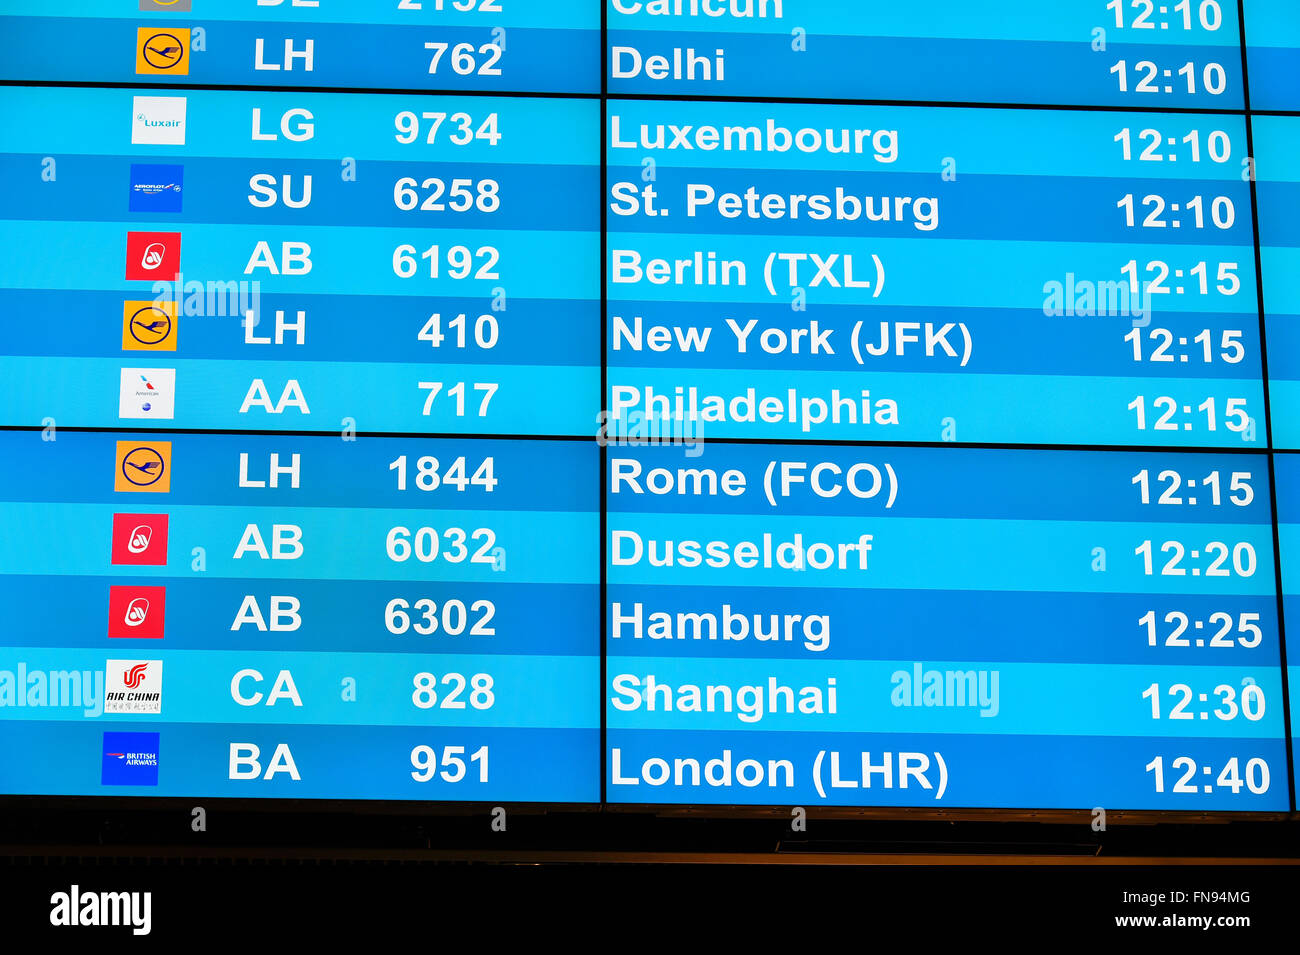 Display, Monitor, Scorebord, show, Flights, Flightnumber, Time, Shedule, Arrival, Departure, Airline, Airlinecode, Sign, No, Stock Photo